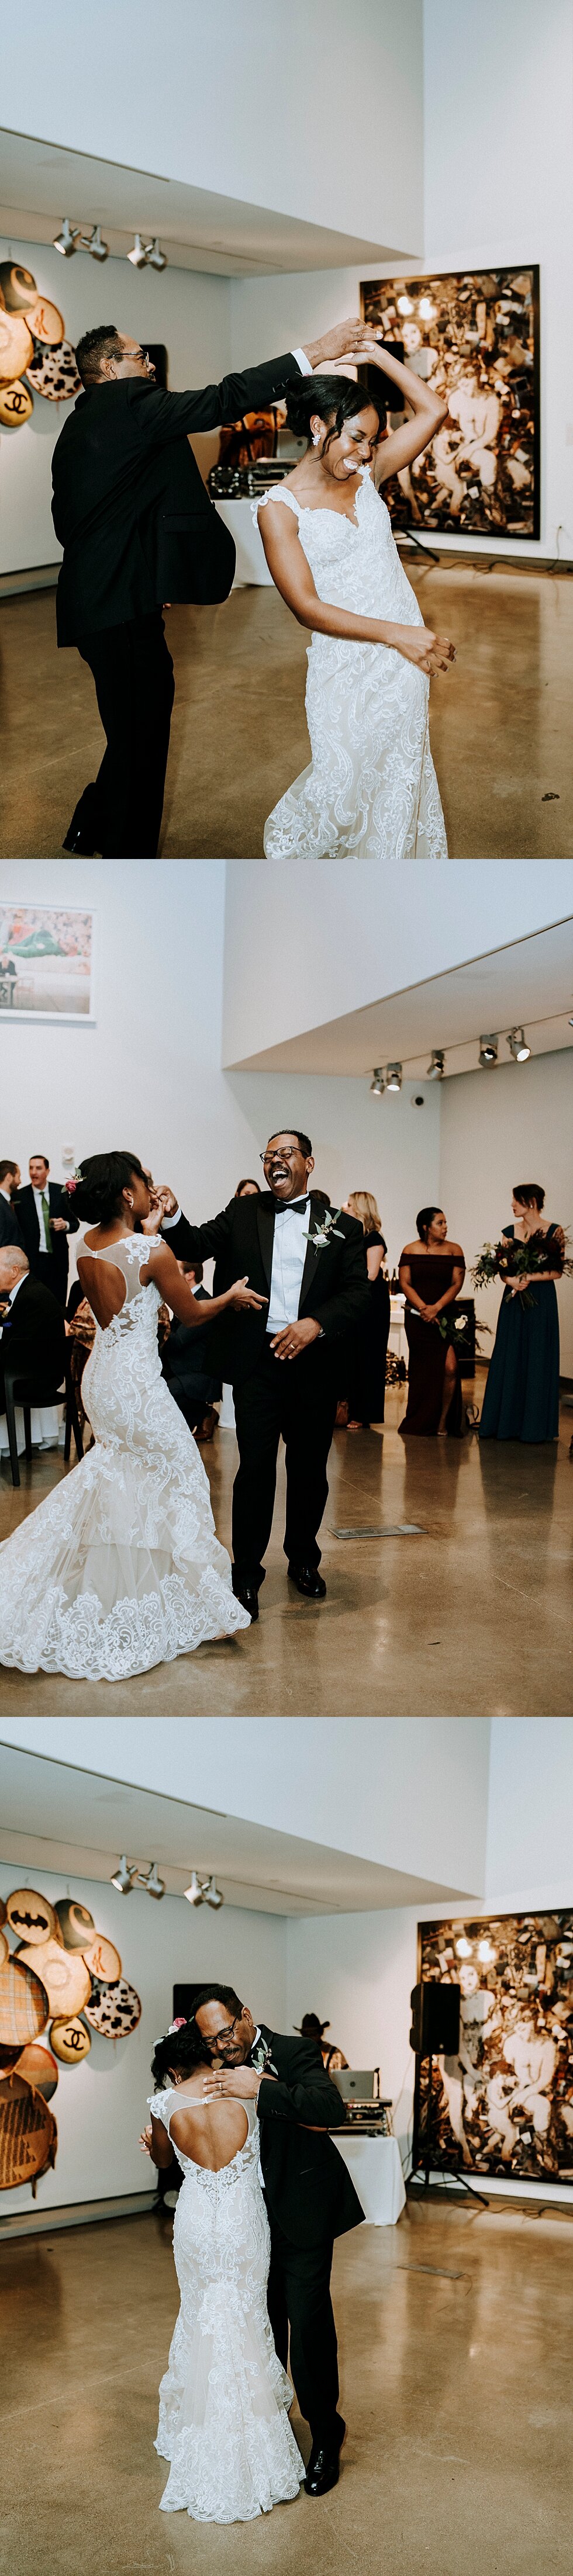  This father of the bride and his daughter sure do know how to bust a move! #weddinggoals #weddingphotographer #married #ceremonyandreception #indianaphotographer #louisvillephotographer #weddingphotos #husbandandwife #gorgeousweddingown #thewholewed